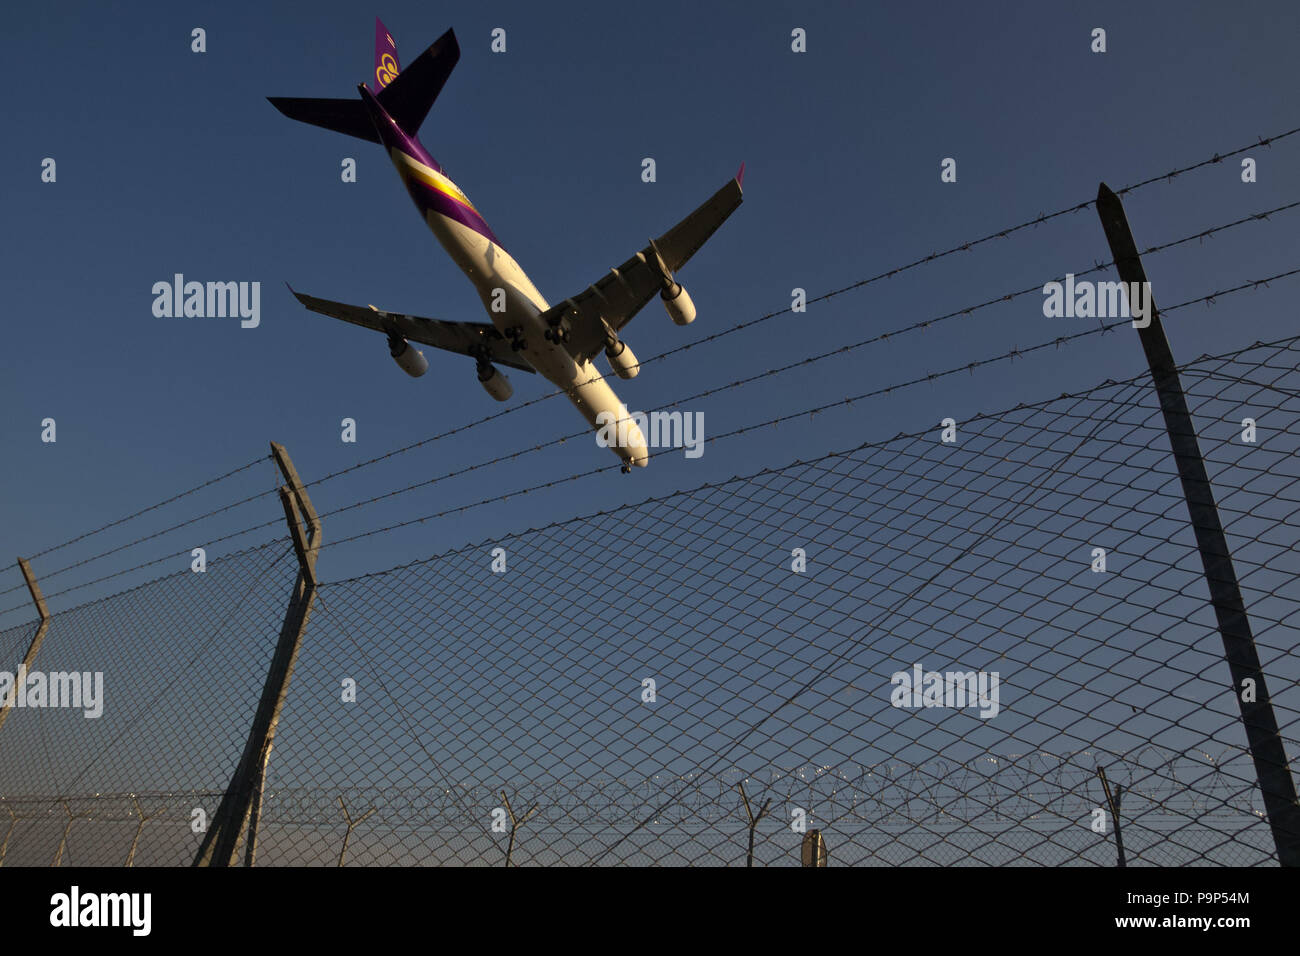 The Airbus A340 civil jet airplane of Thai Airways flies over security fence as it lands at Malpensa International Airport, Milan, Italy Stock Photo